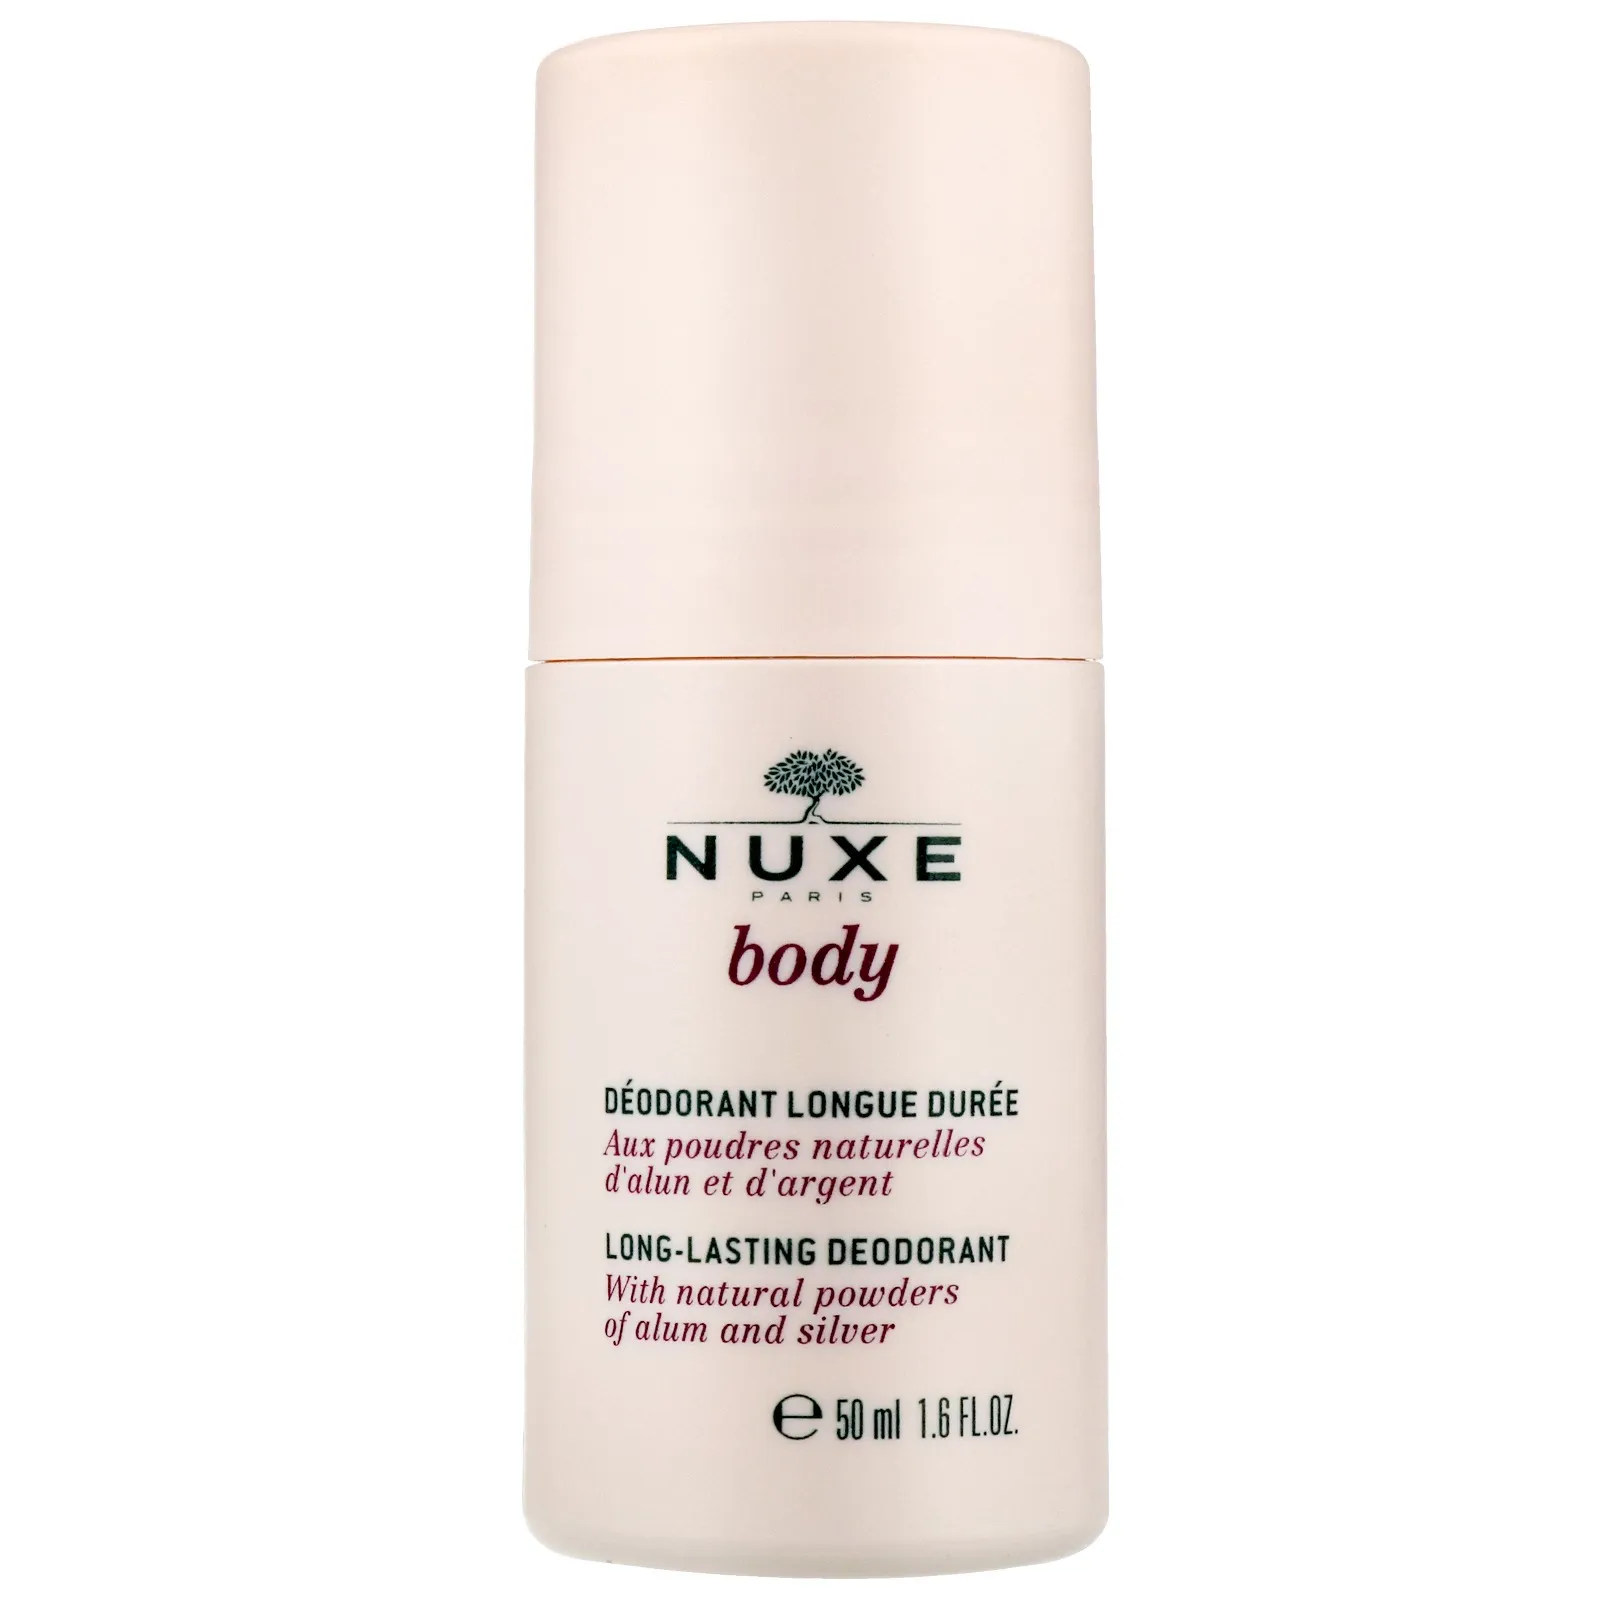 Body Long-Lasting Deodorant by Nuxe, one of the best French natural deodorants.